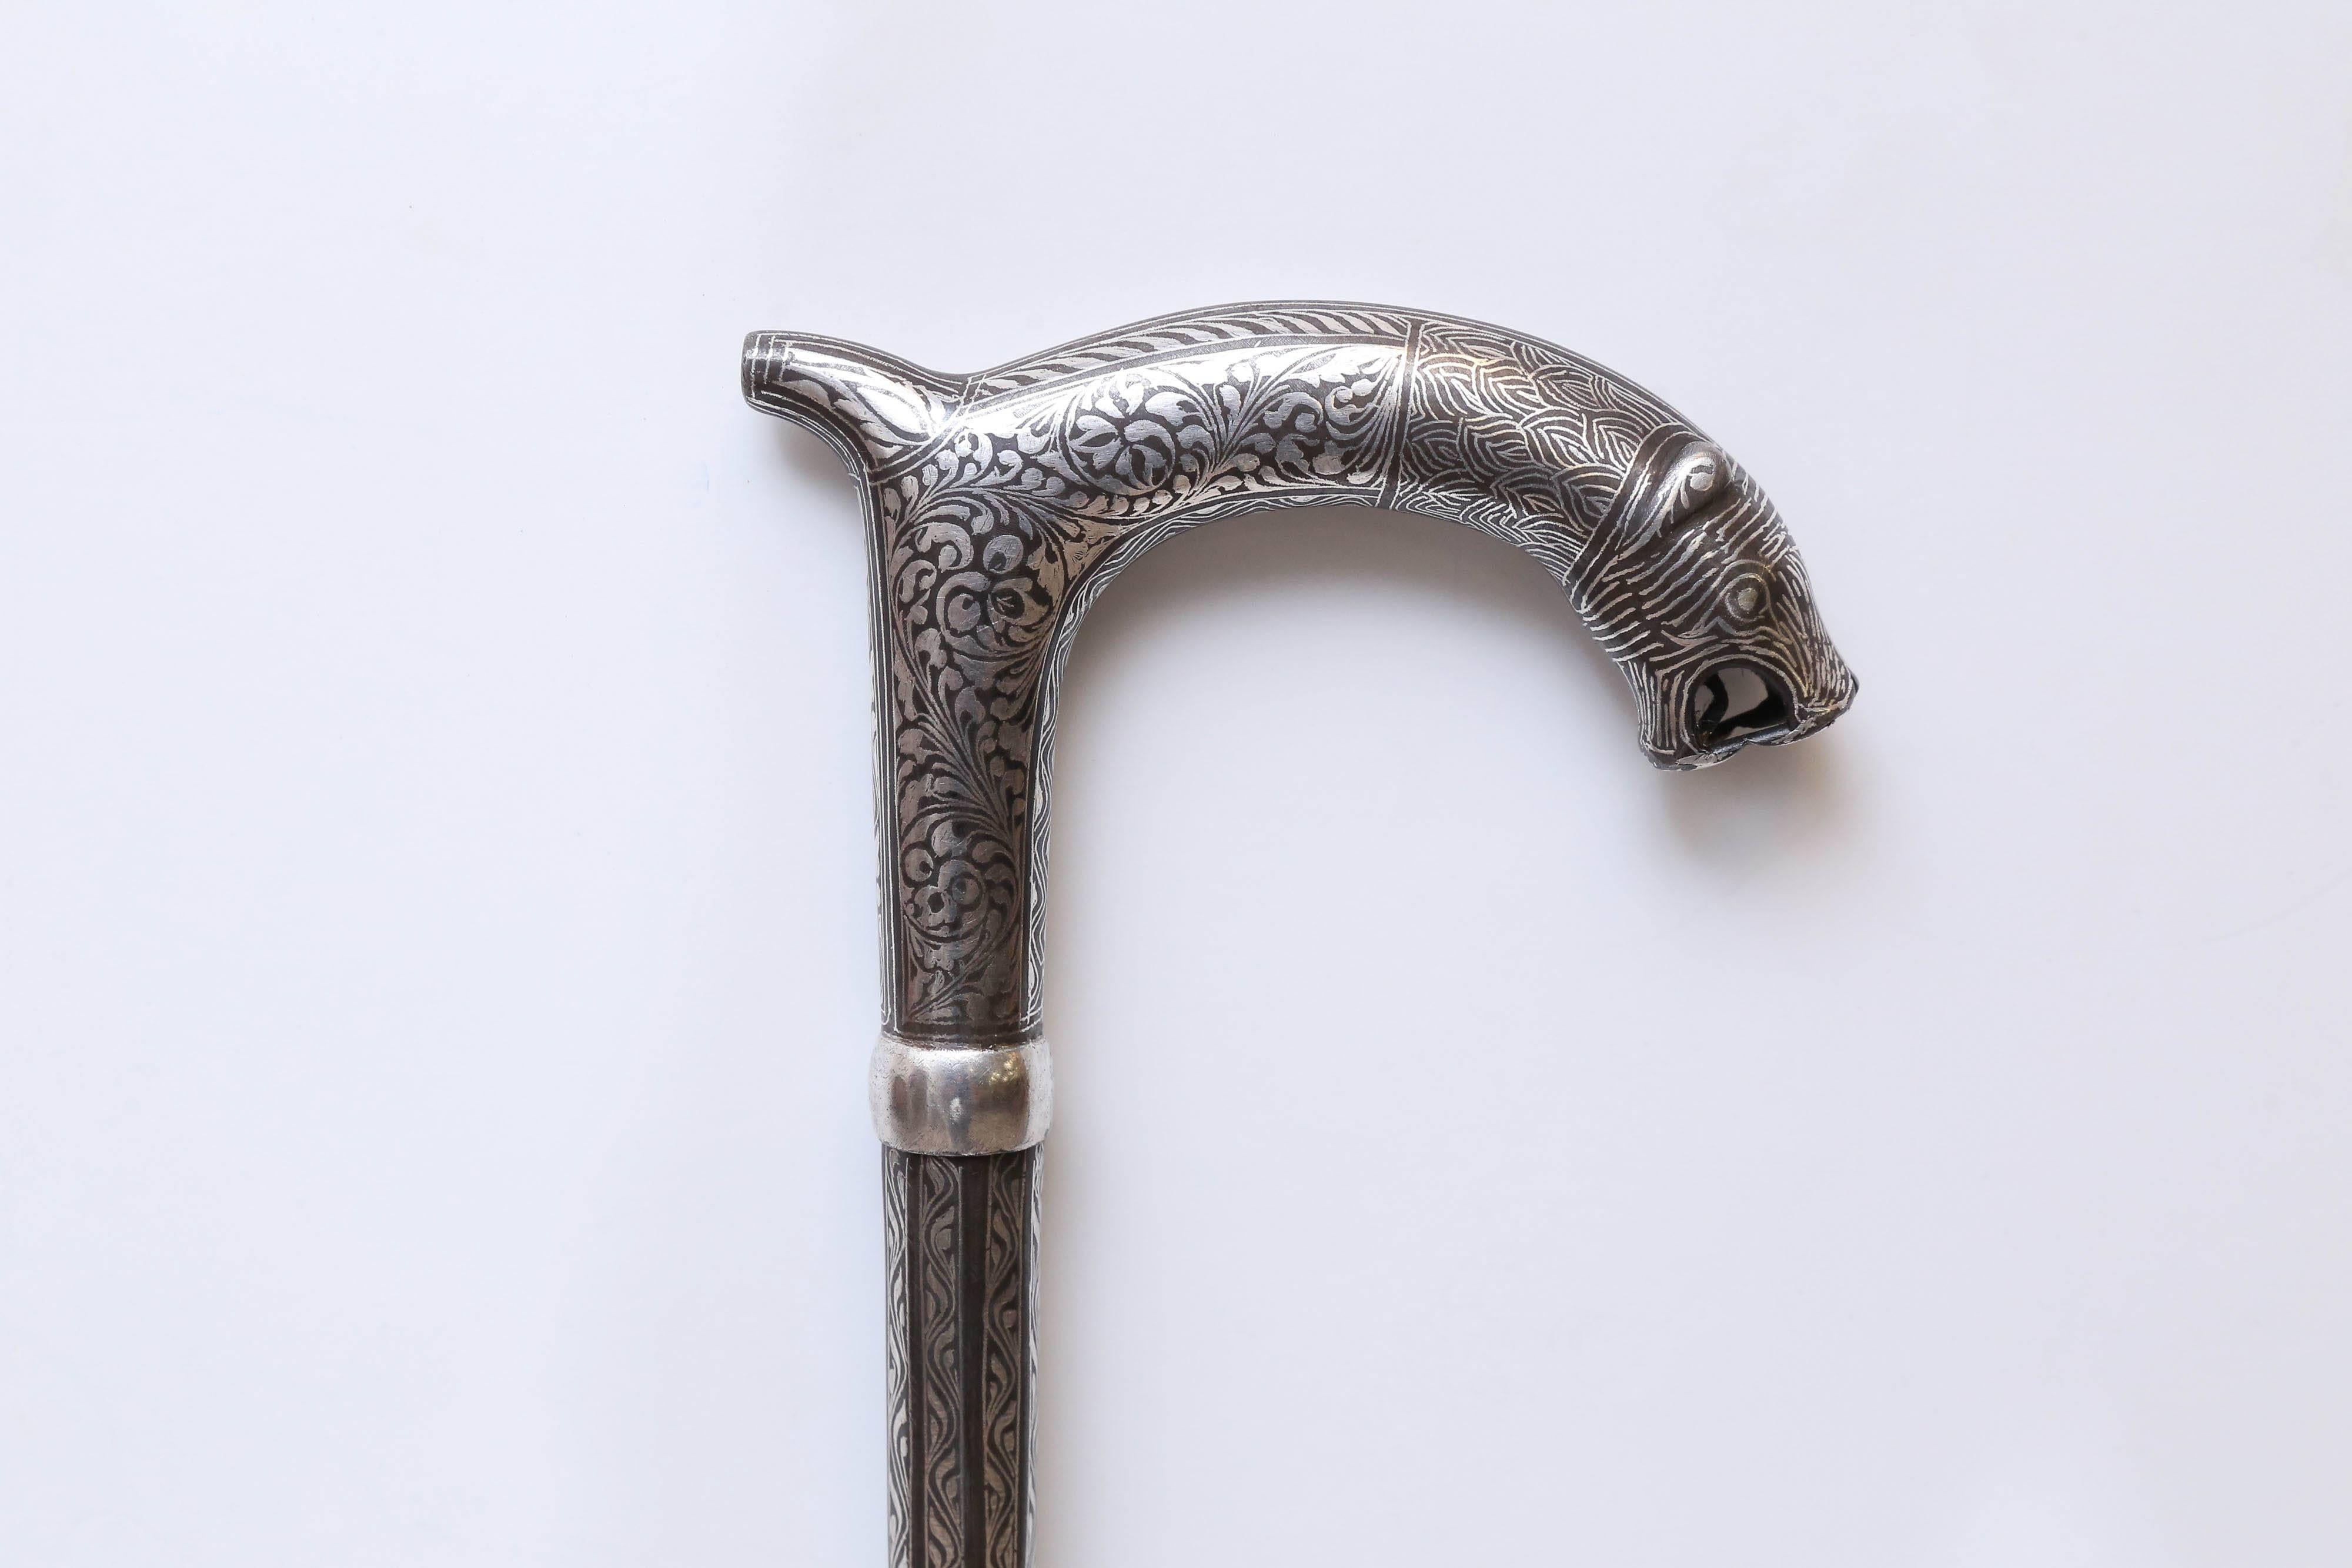 A great Christmas presentation piece. Intricate silver filigree work on iron highlight this unique walking stick. It has a long decorative knife inside. It is 37" long and 1" diameter at the handle. The bottom three inches is all silver.